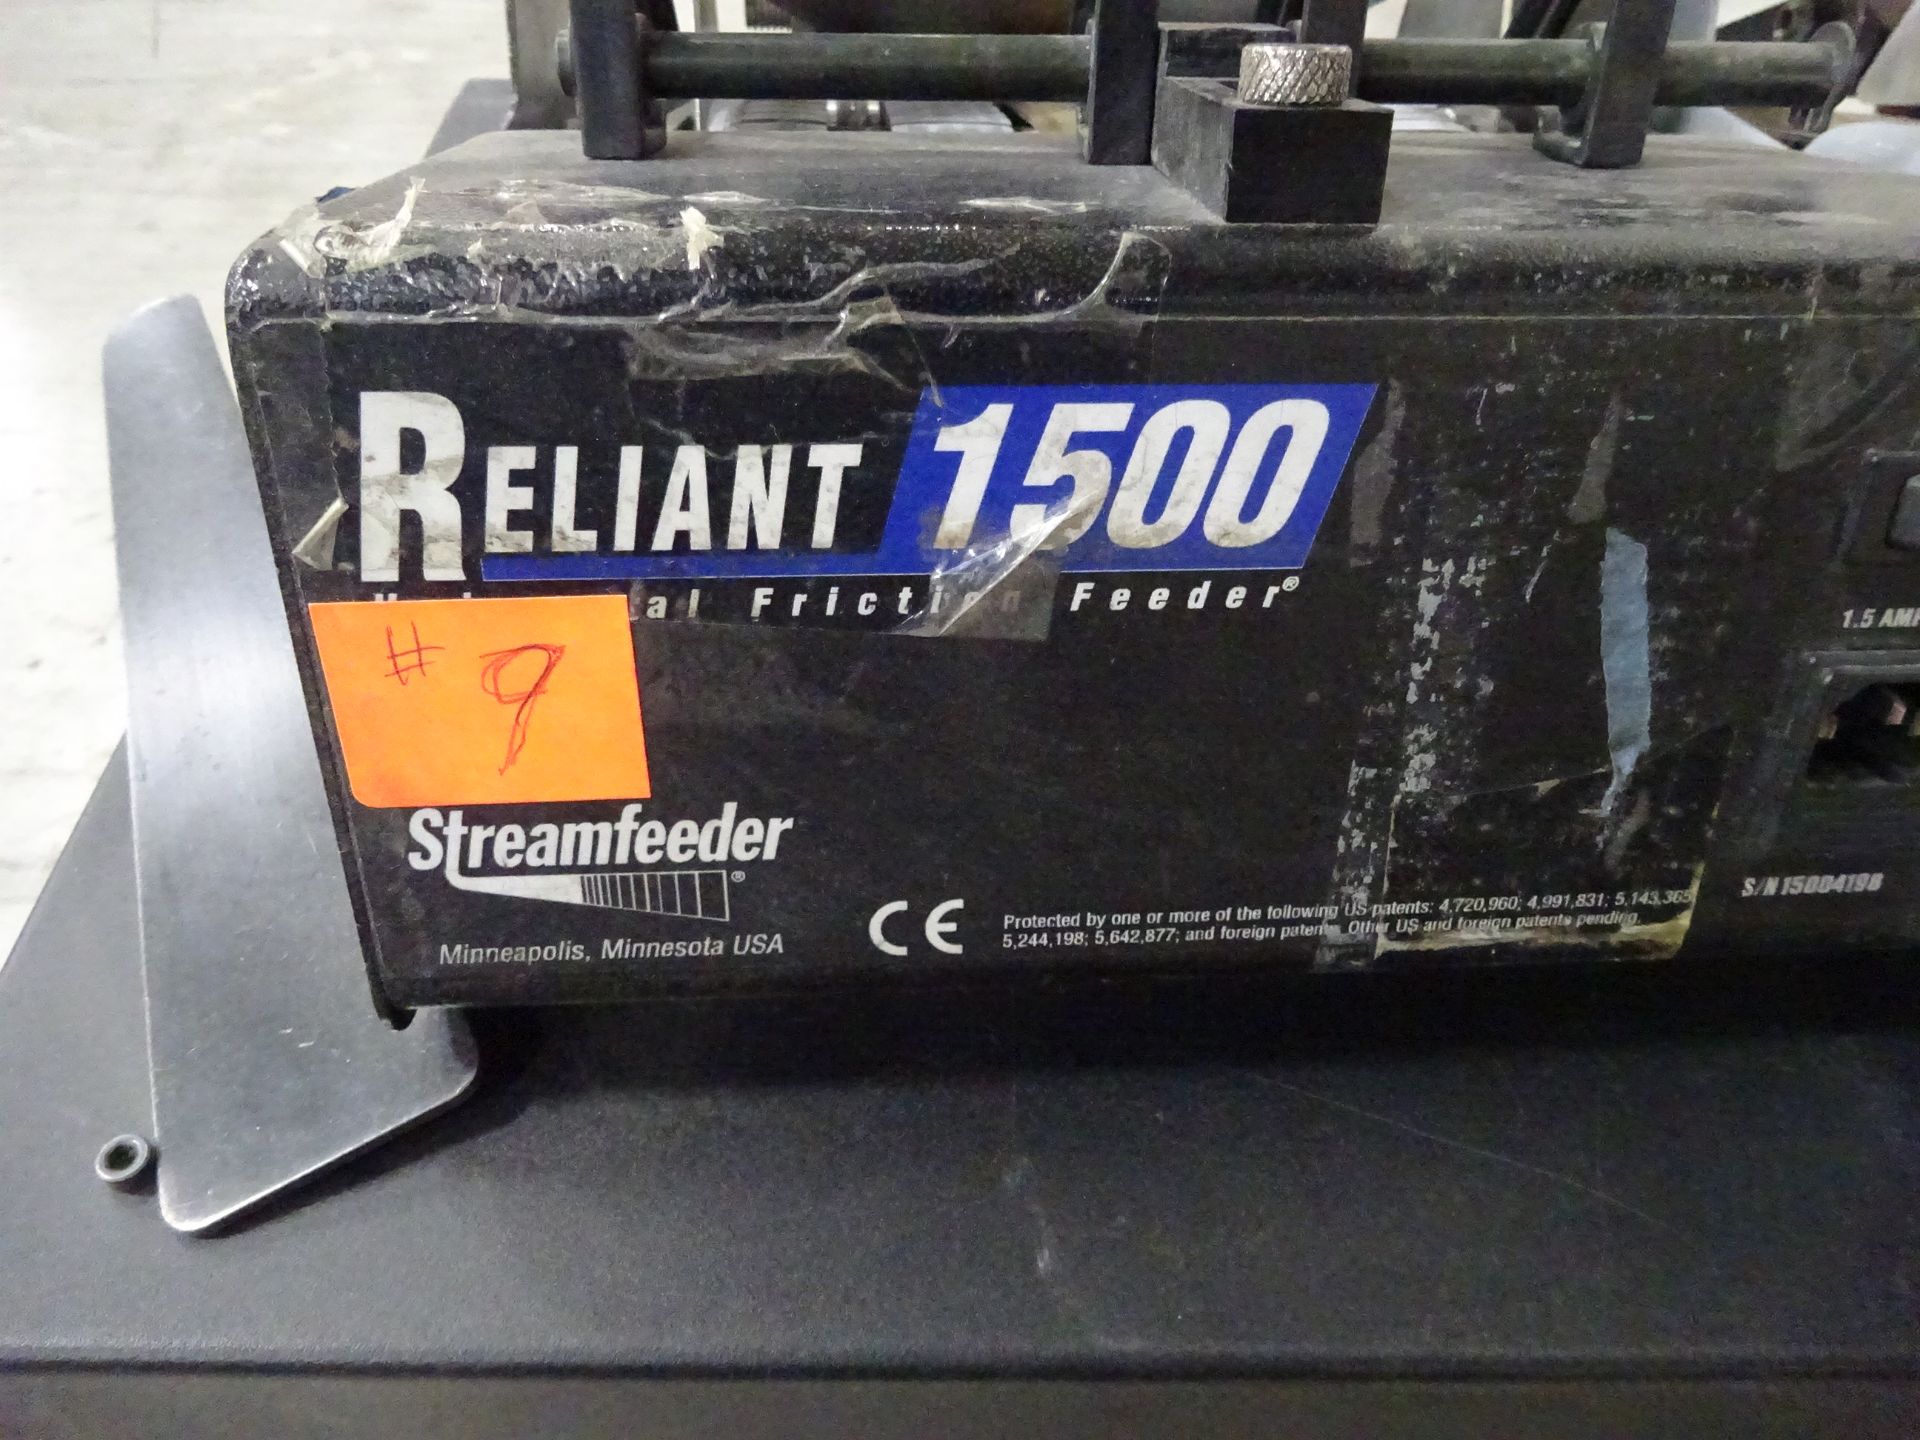 (3) Stand Alone Streanfeeder Product Feeders Including Reliant 1500, Md. 1 And Thiele Streamfeeder - Image 2 of 5